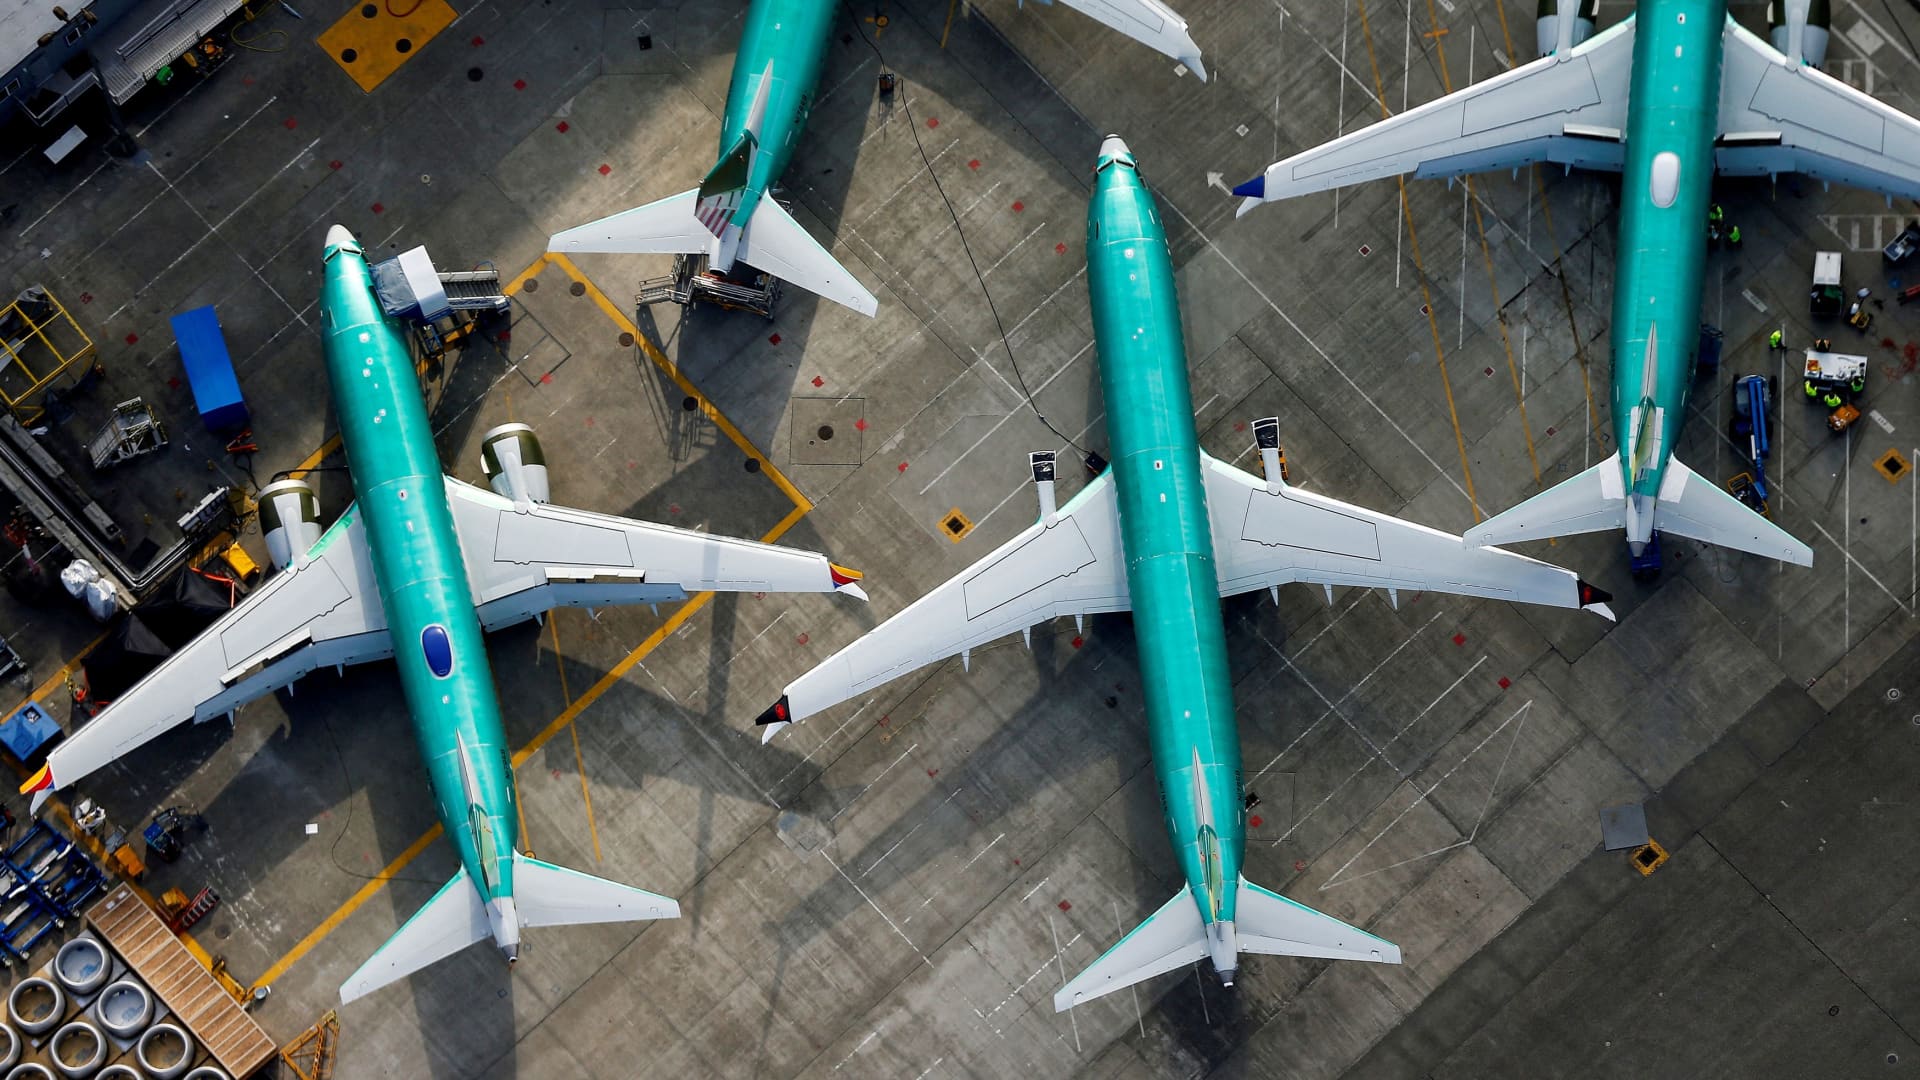 Boeing 737 Max planes on the tarmac